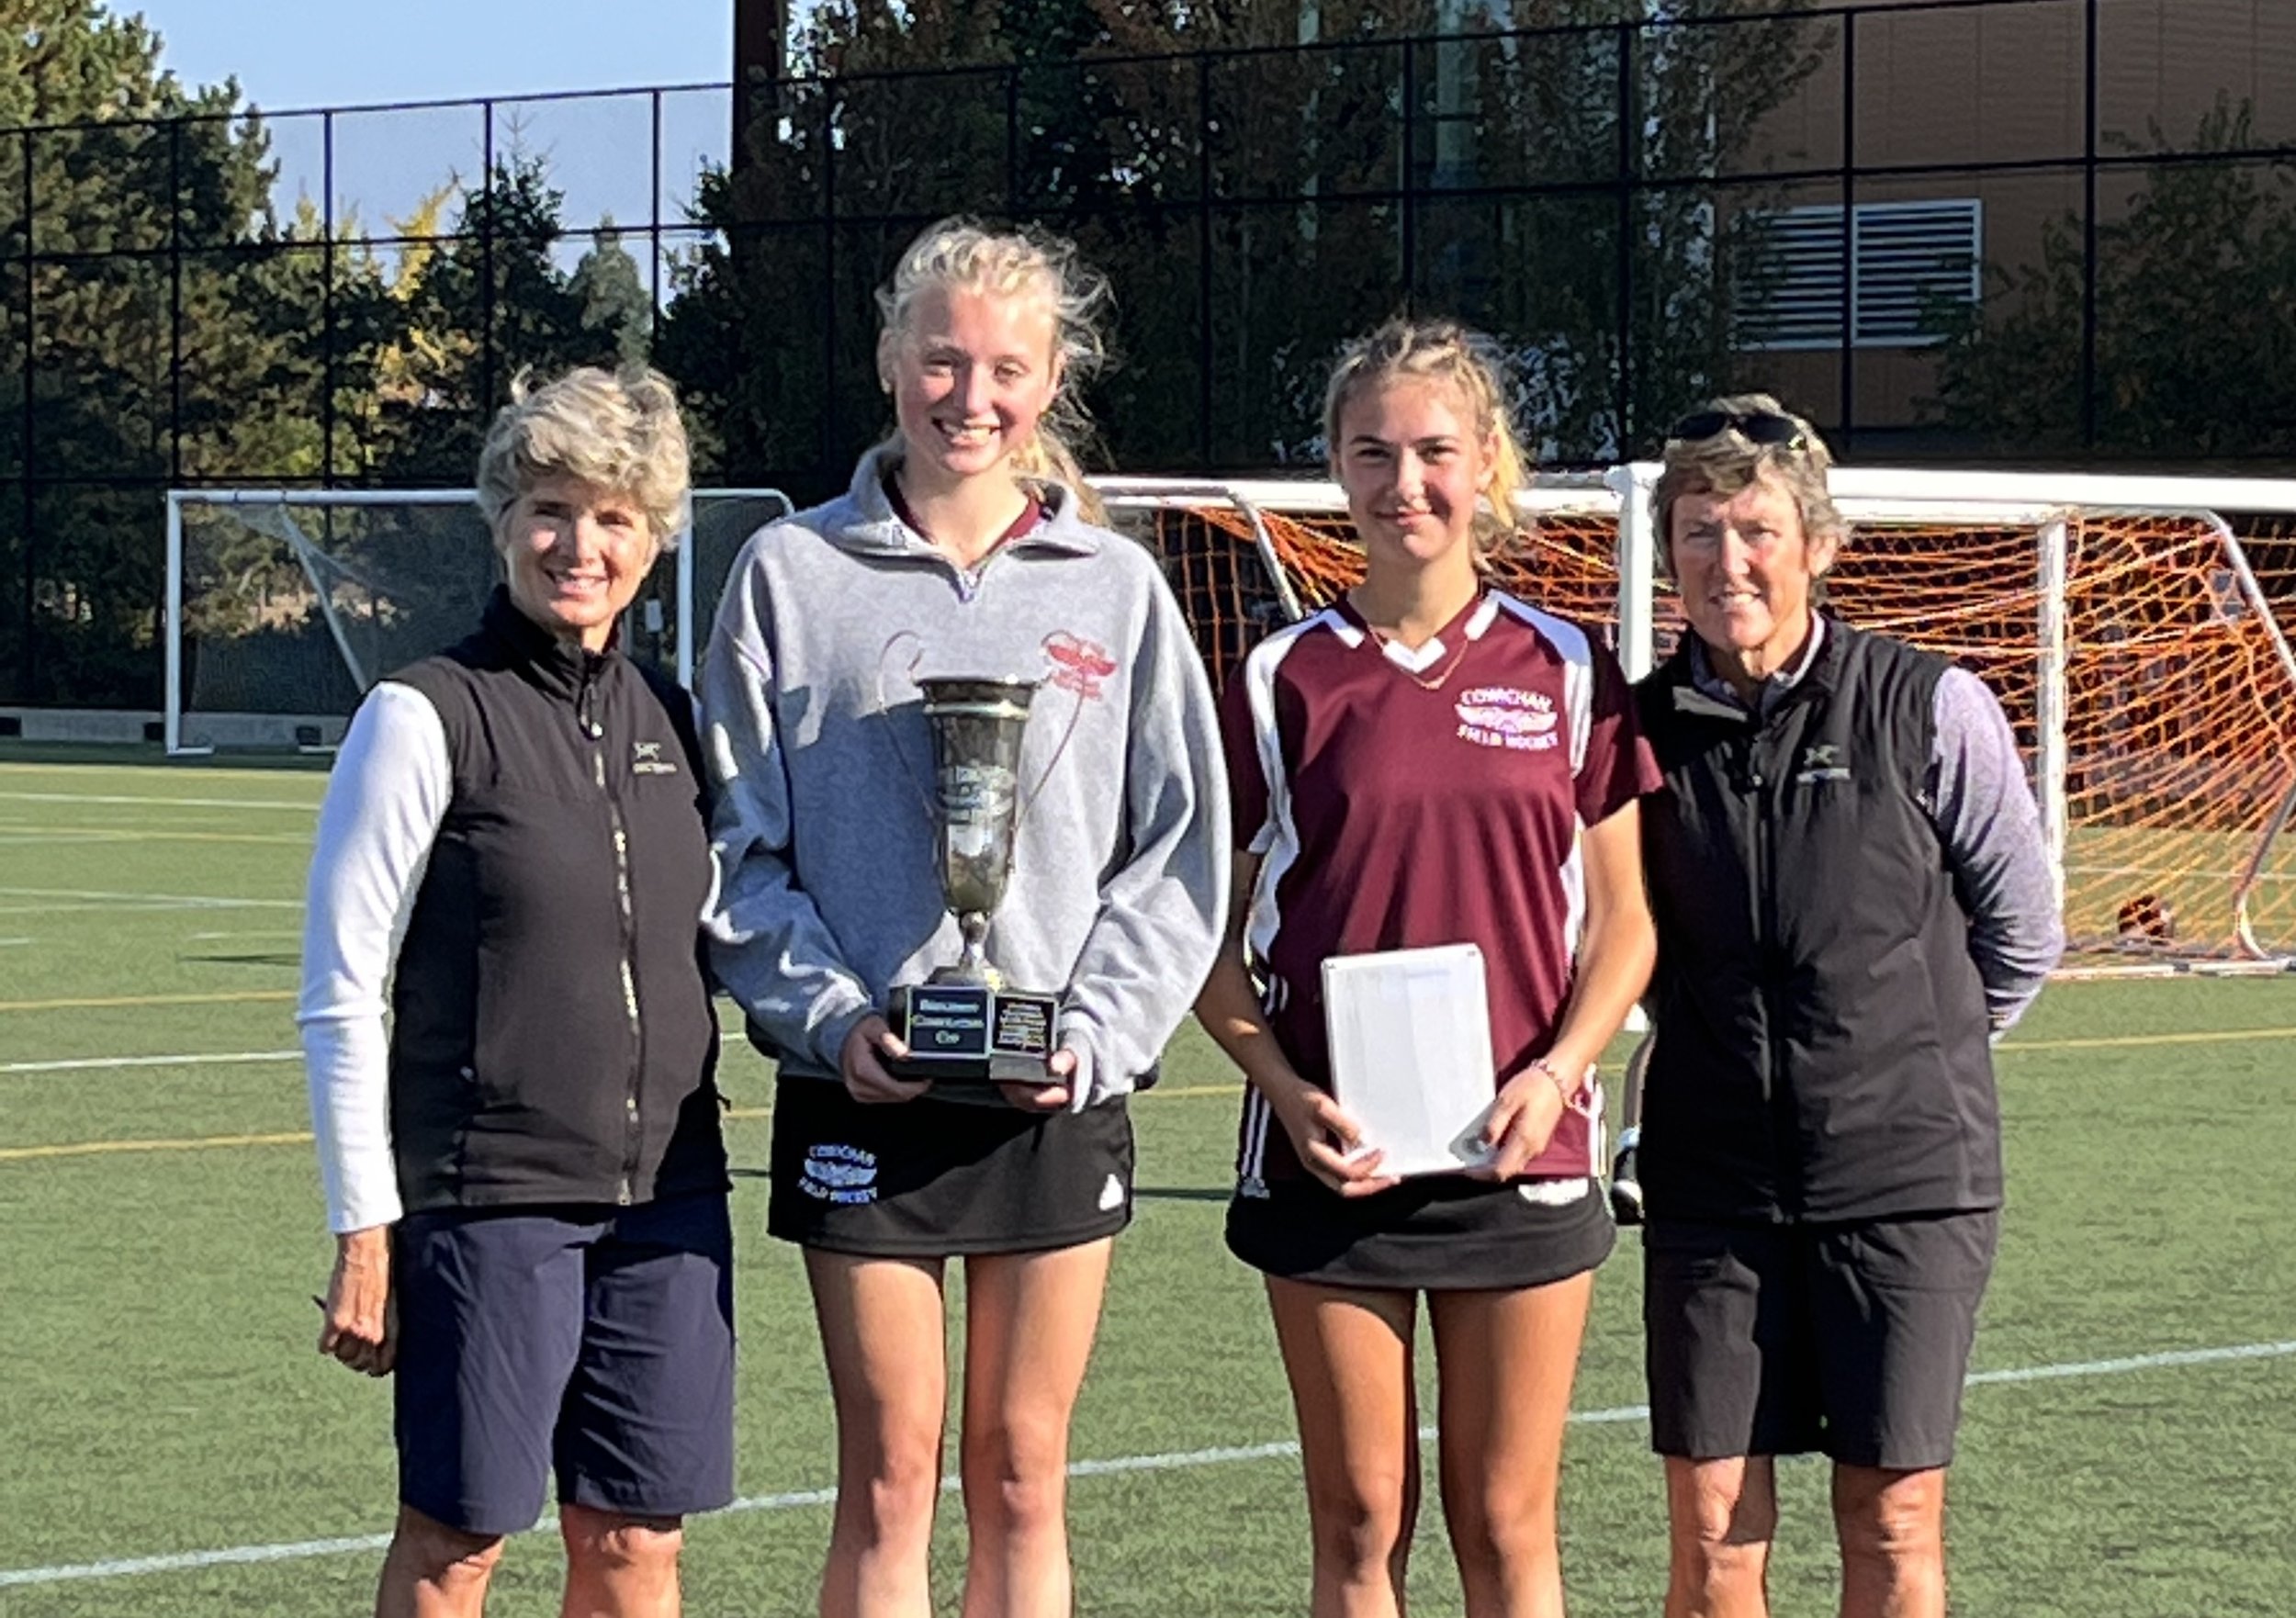  2022 Consolation Champions: Cowichan Secondary. Captains presented with Nancy Mollenhauer, Carrie Trumpy 